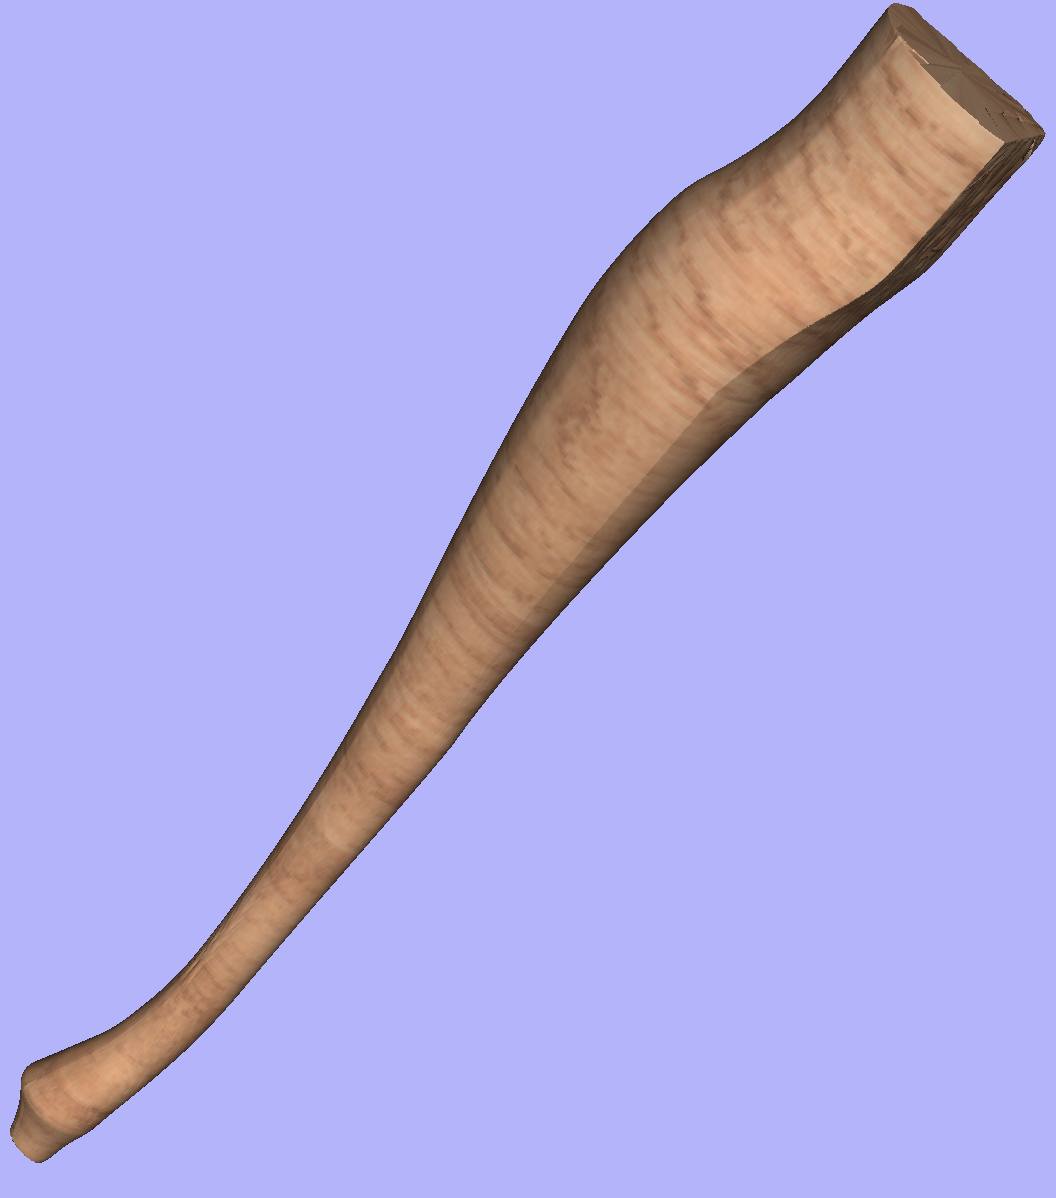 A table leg modelled using techniques from single-sided modelling 